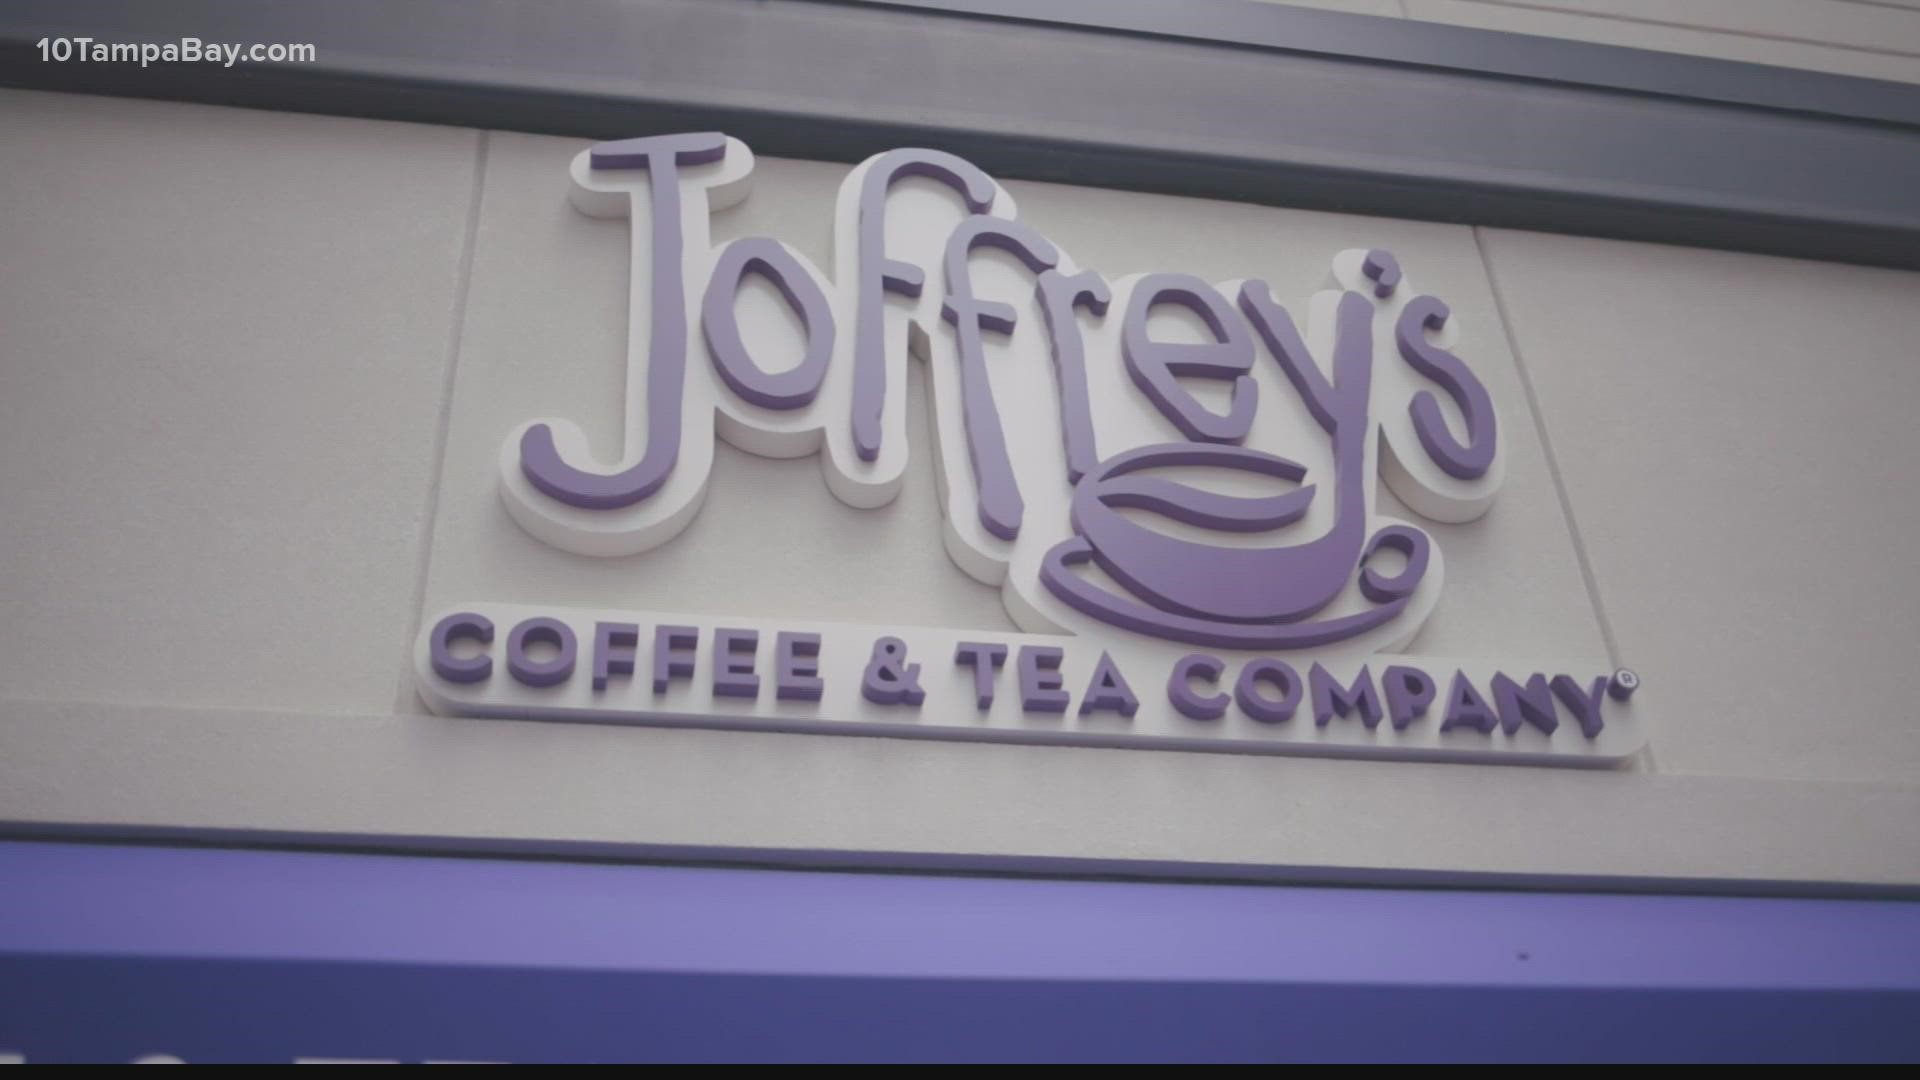 Joffrey's Coffee, Disney World's specialty coffee supplier, opened a location in Tampa's midtown.